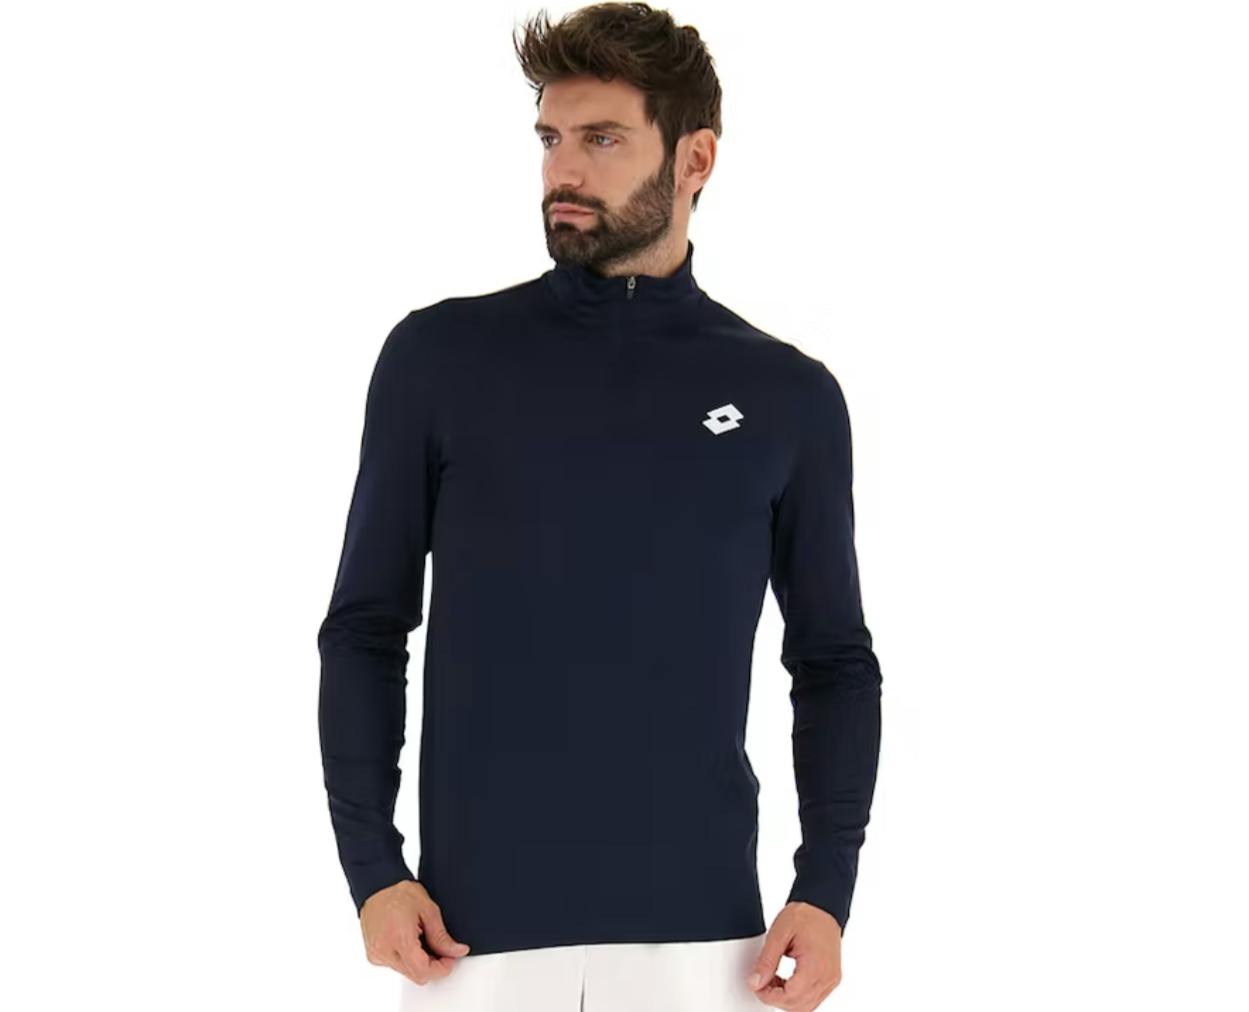 A man wearing the Lotto Core Sweat Half Zip in the color Navy Blue.